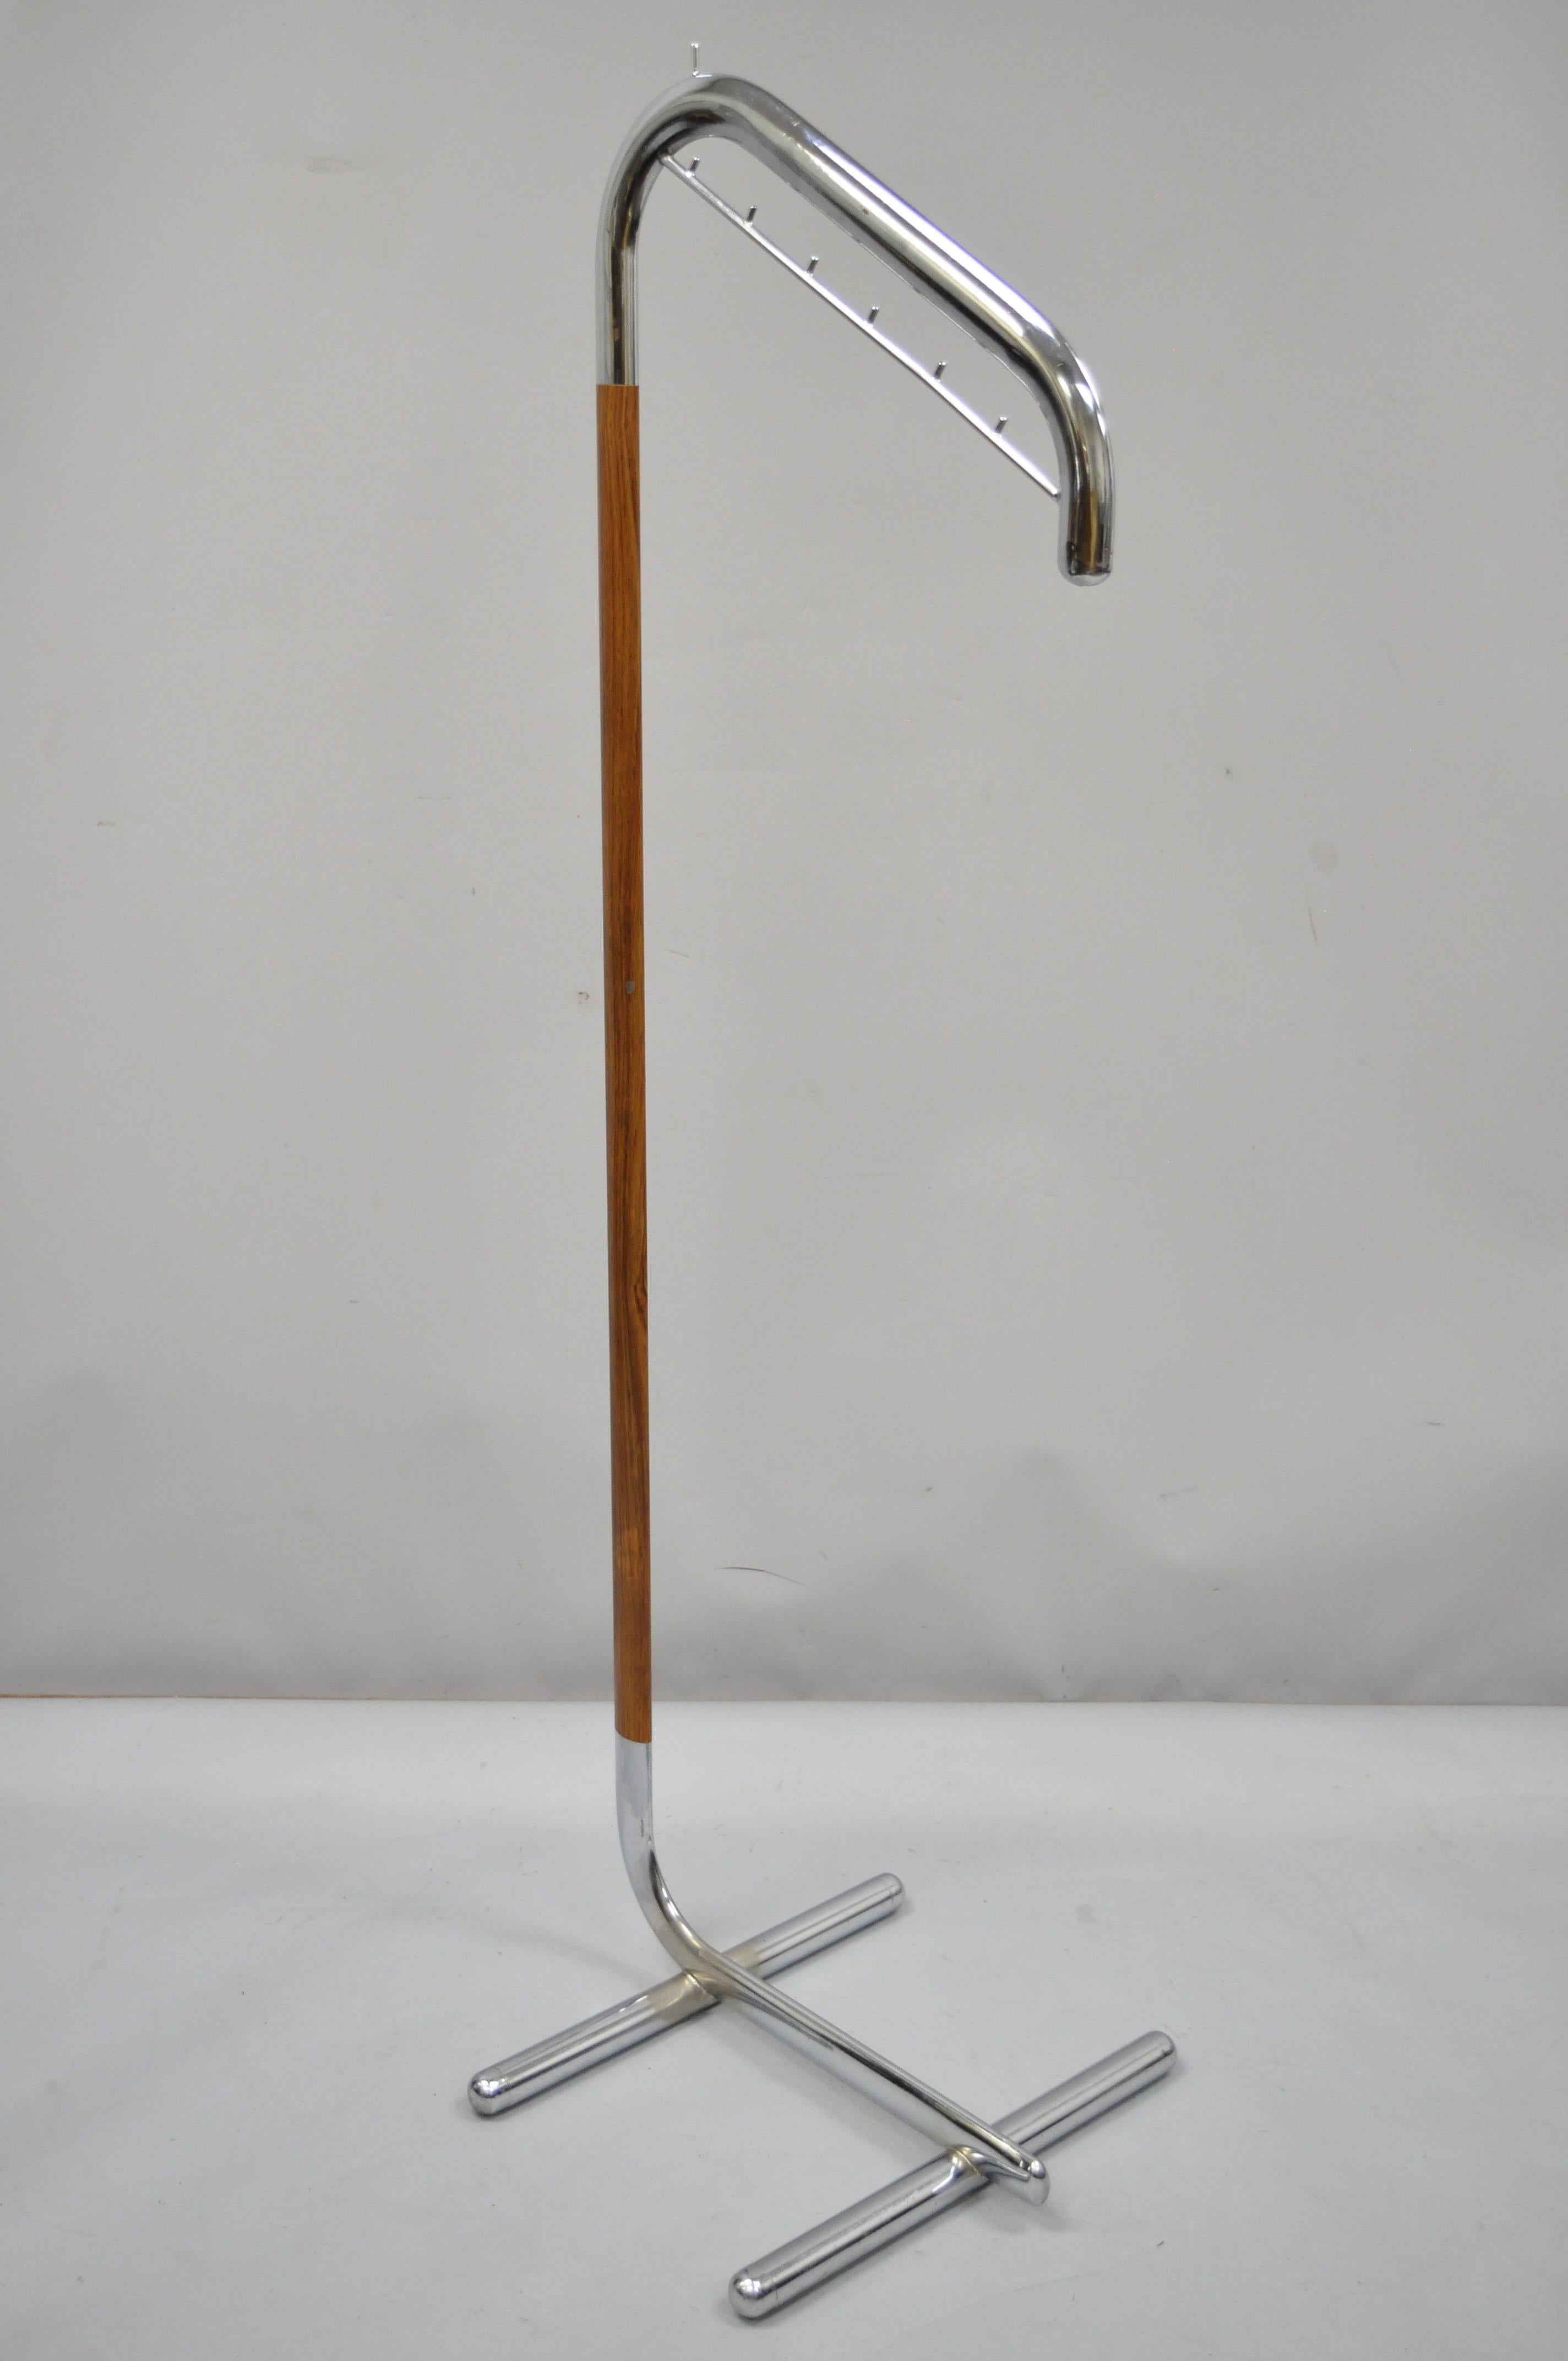 Vintage Italian Mid-Century Modern chrome metal clothing rack clothes valet hanger (A). Item features sleek metal construction, faux wood grain laminated wrapped shaft (not wood), cantilever style frame, various hooks, very nice vintage item, great